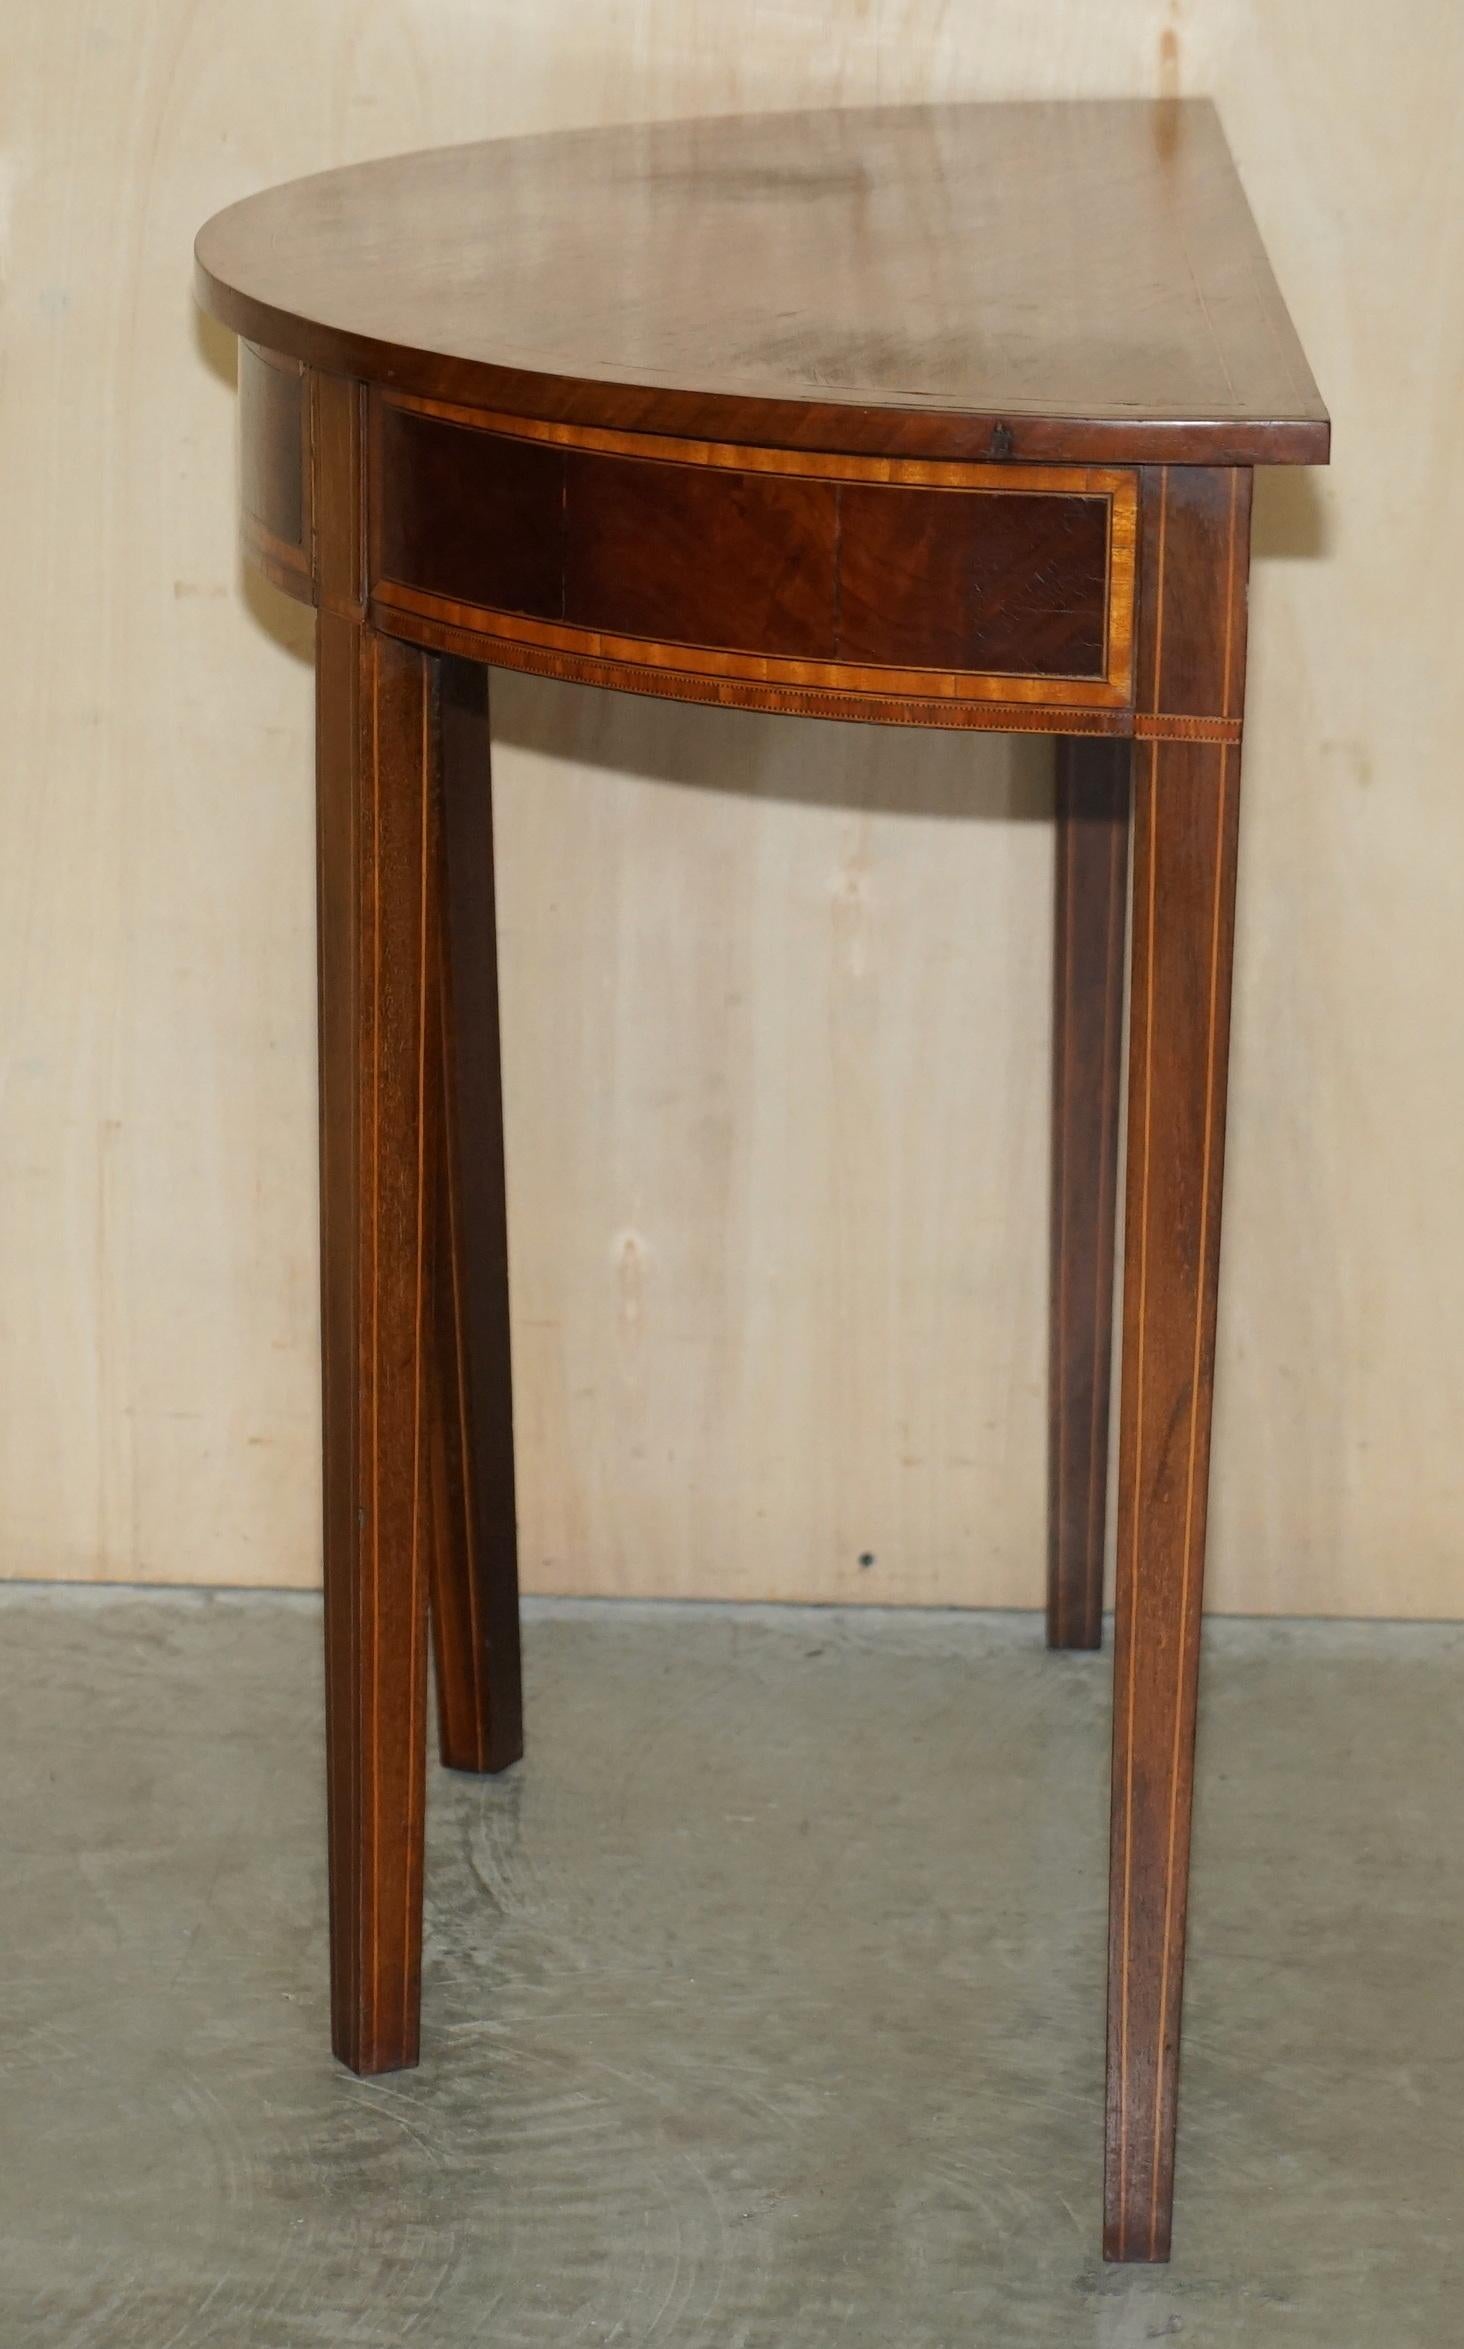 ANTIQUE ViCTORIAN HARDWOOD & WALNUT DEMI LUNE HALF MOON ONE DRAWER CONSOLE TABLE For Sale 4